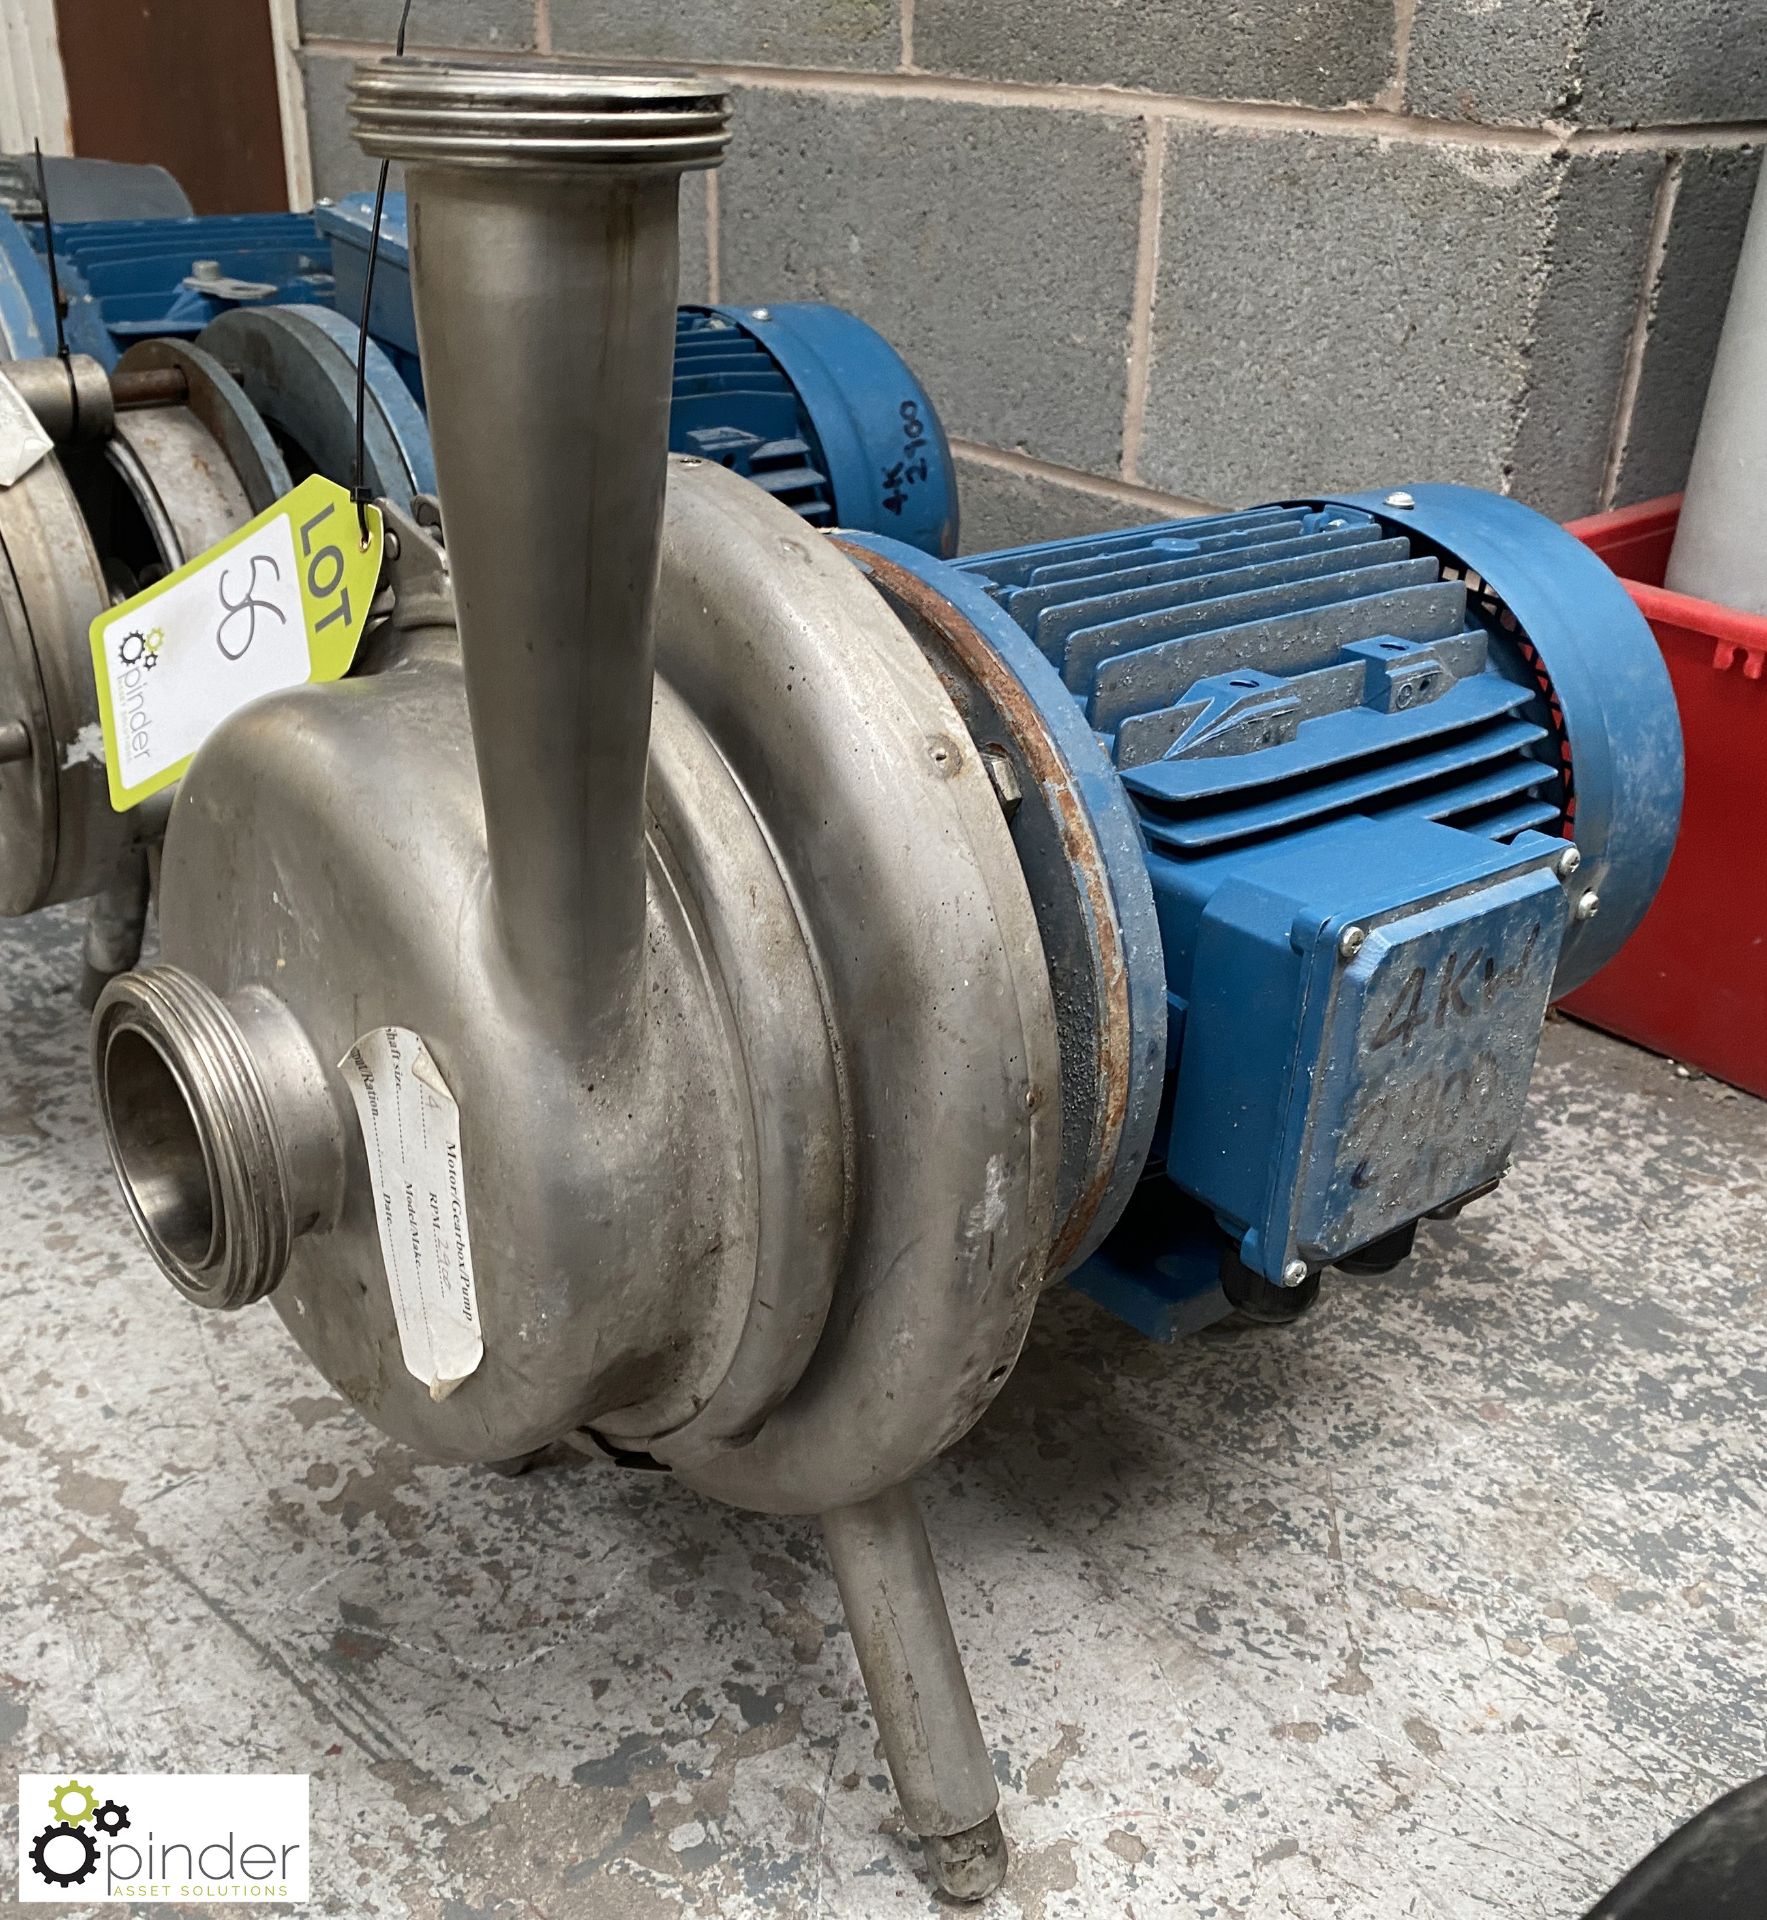 APV W-30/25-220 stainless steel Centrifugal Dairy Pump, with 4kw motor (Location Carlisle Site 1)